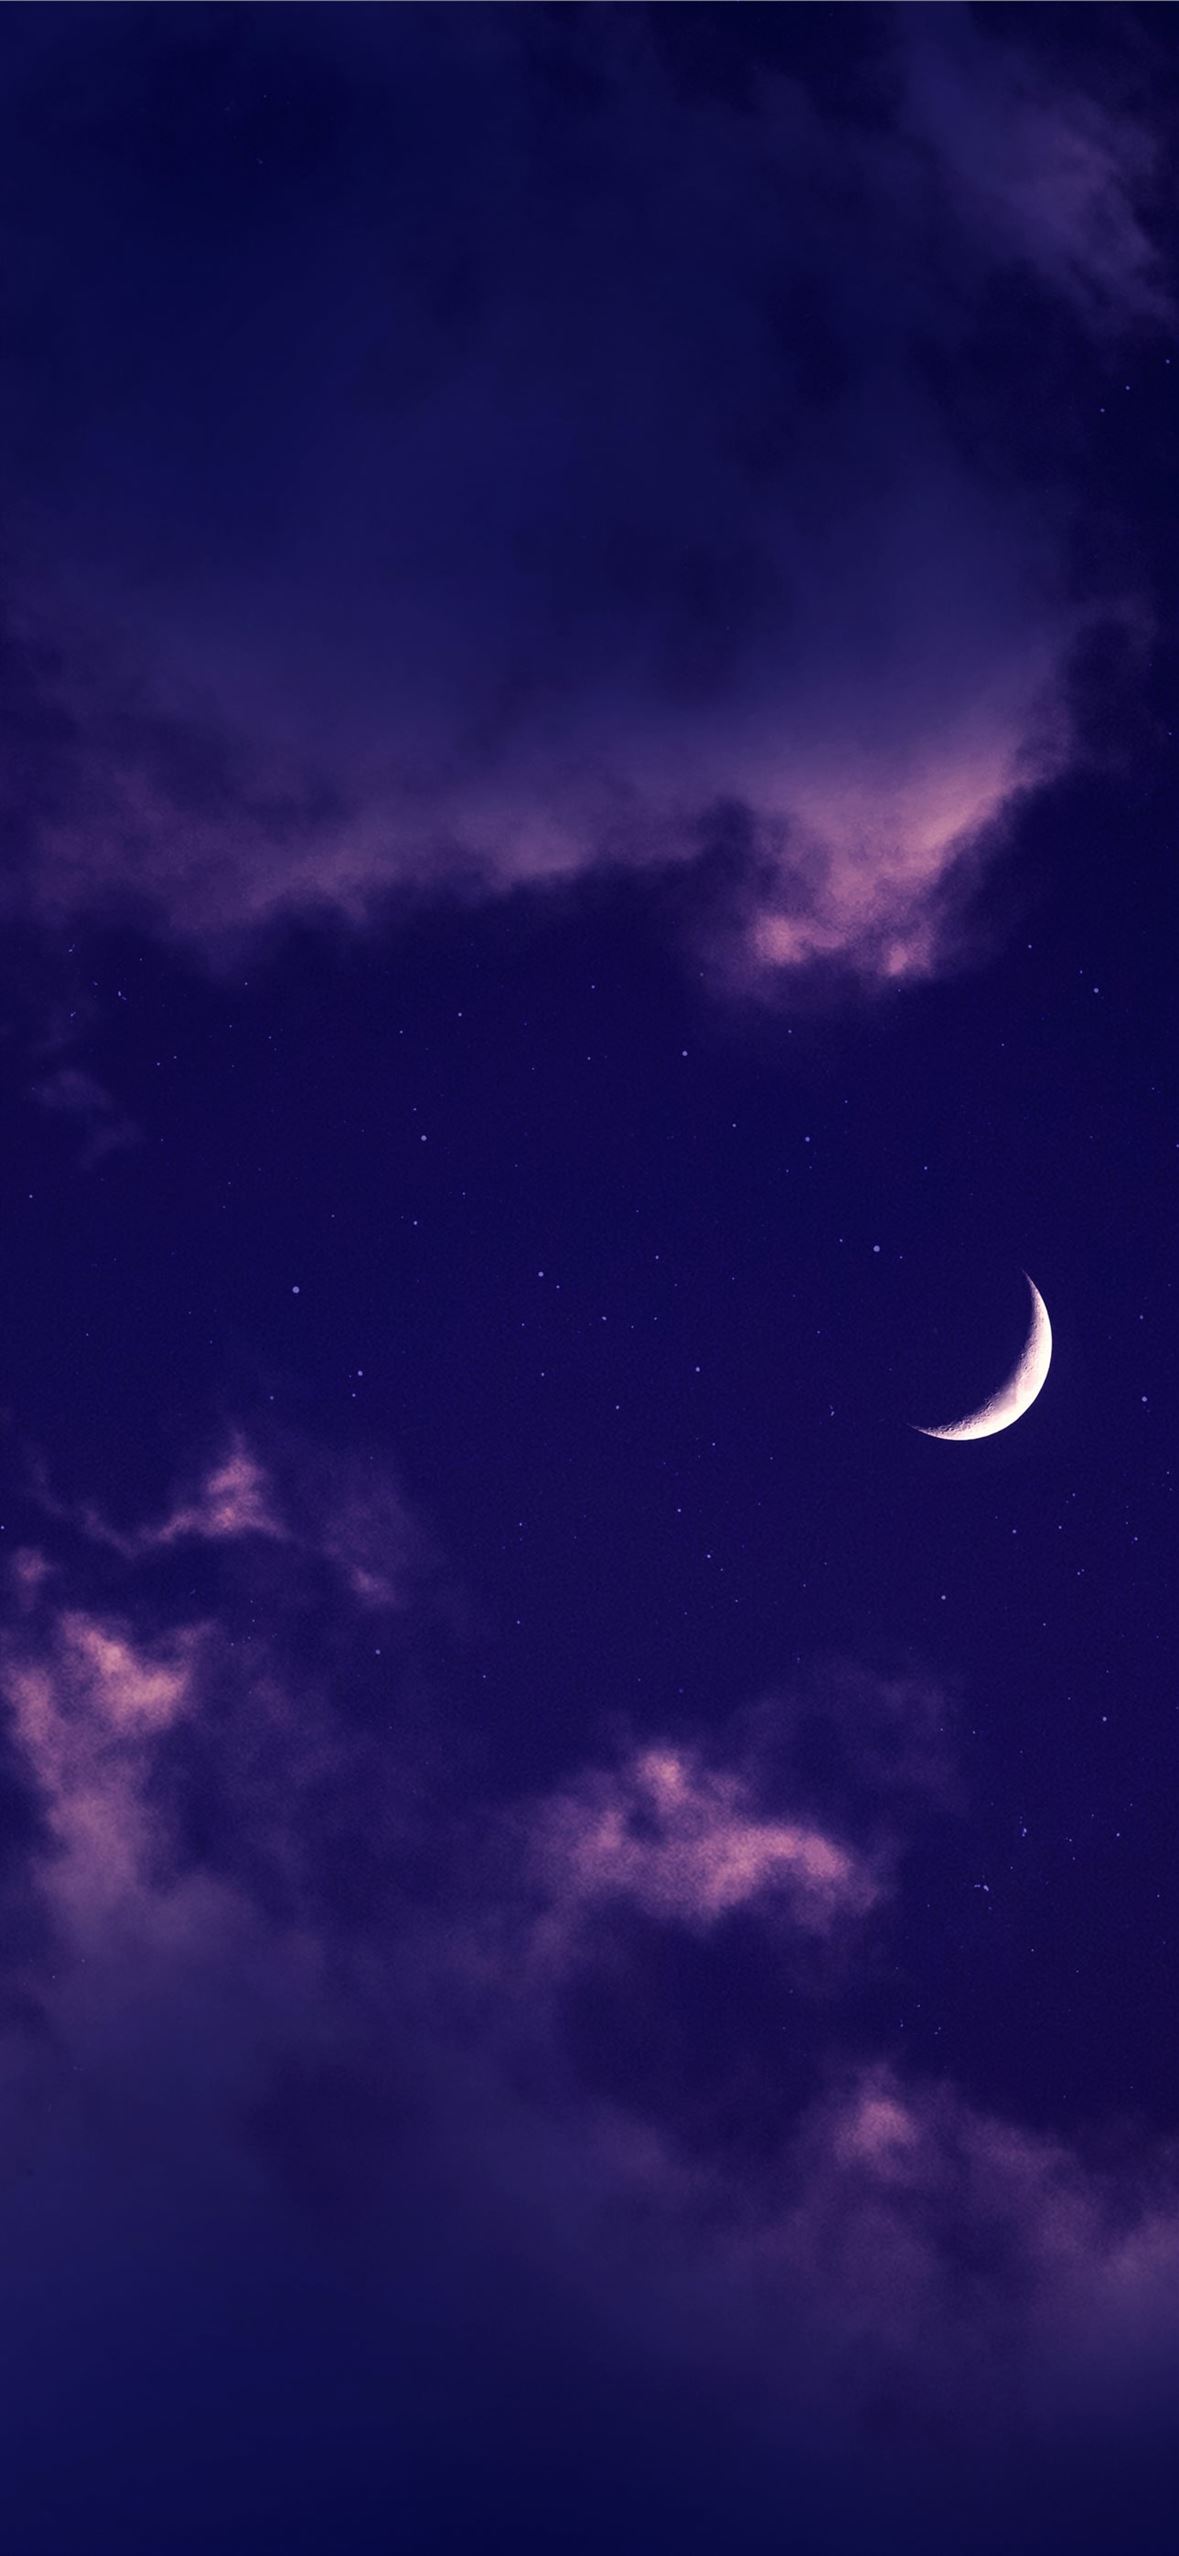 Download Gazing into the Mysterious Aesthetic Night Sky Wallpaper   Wallpaperscom